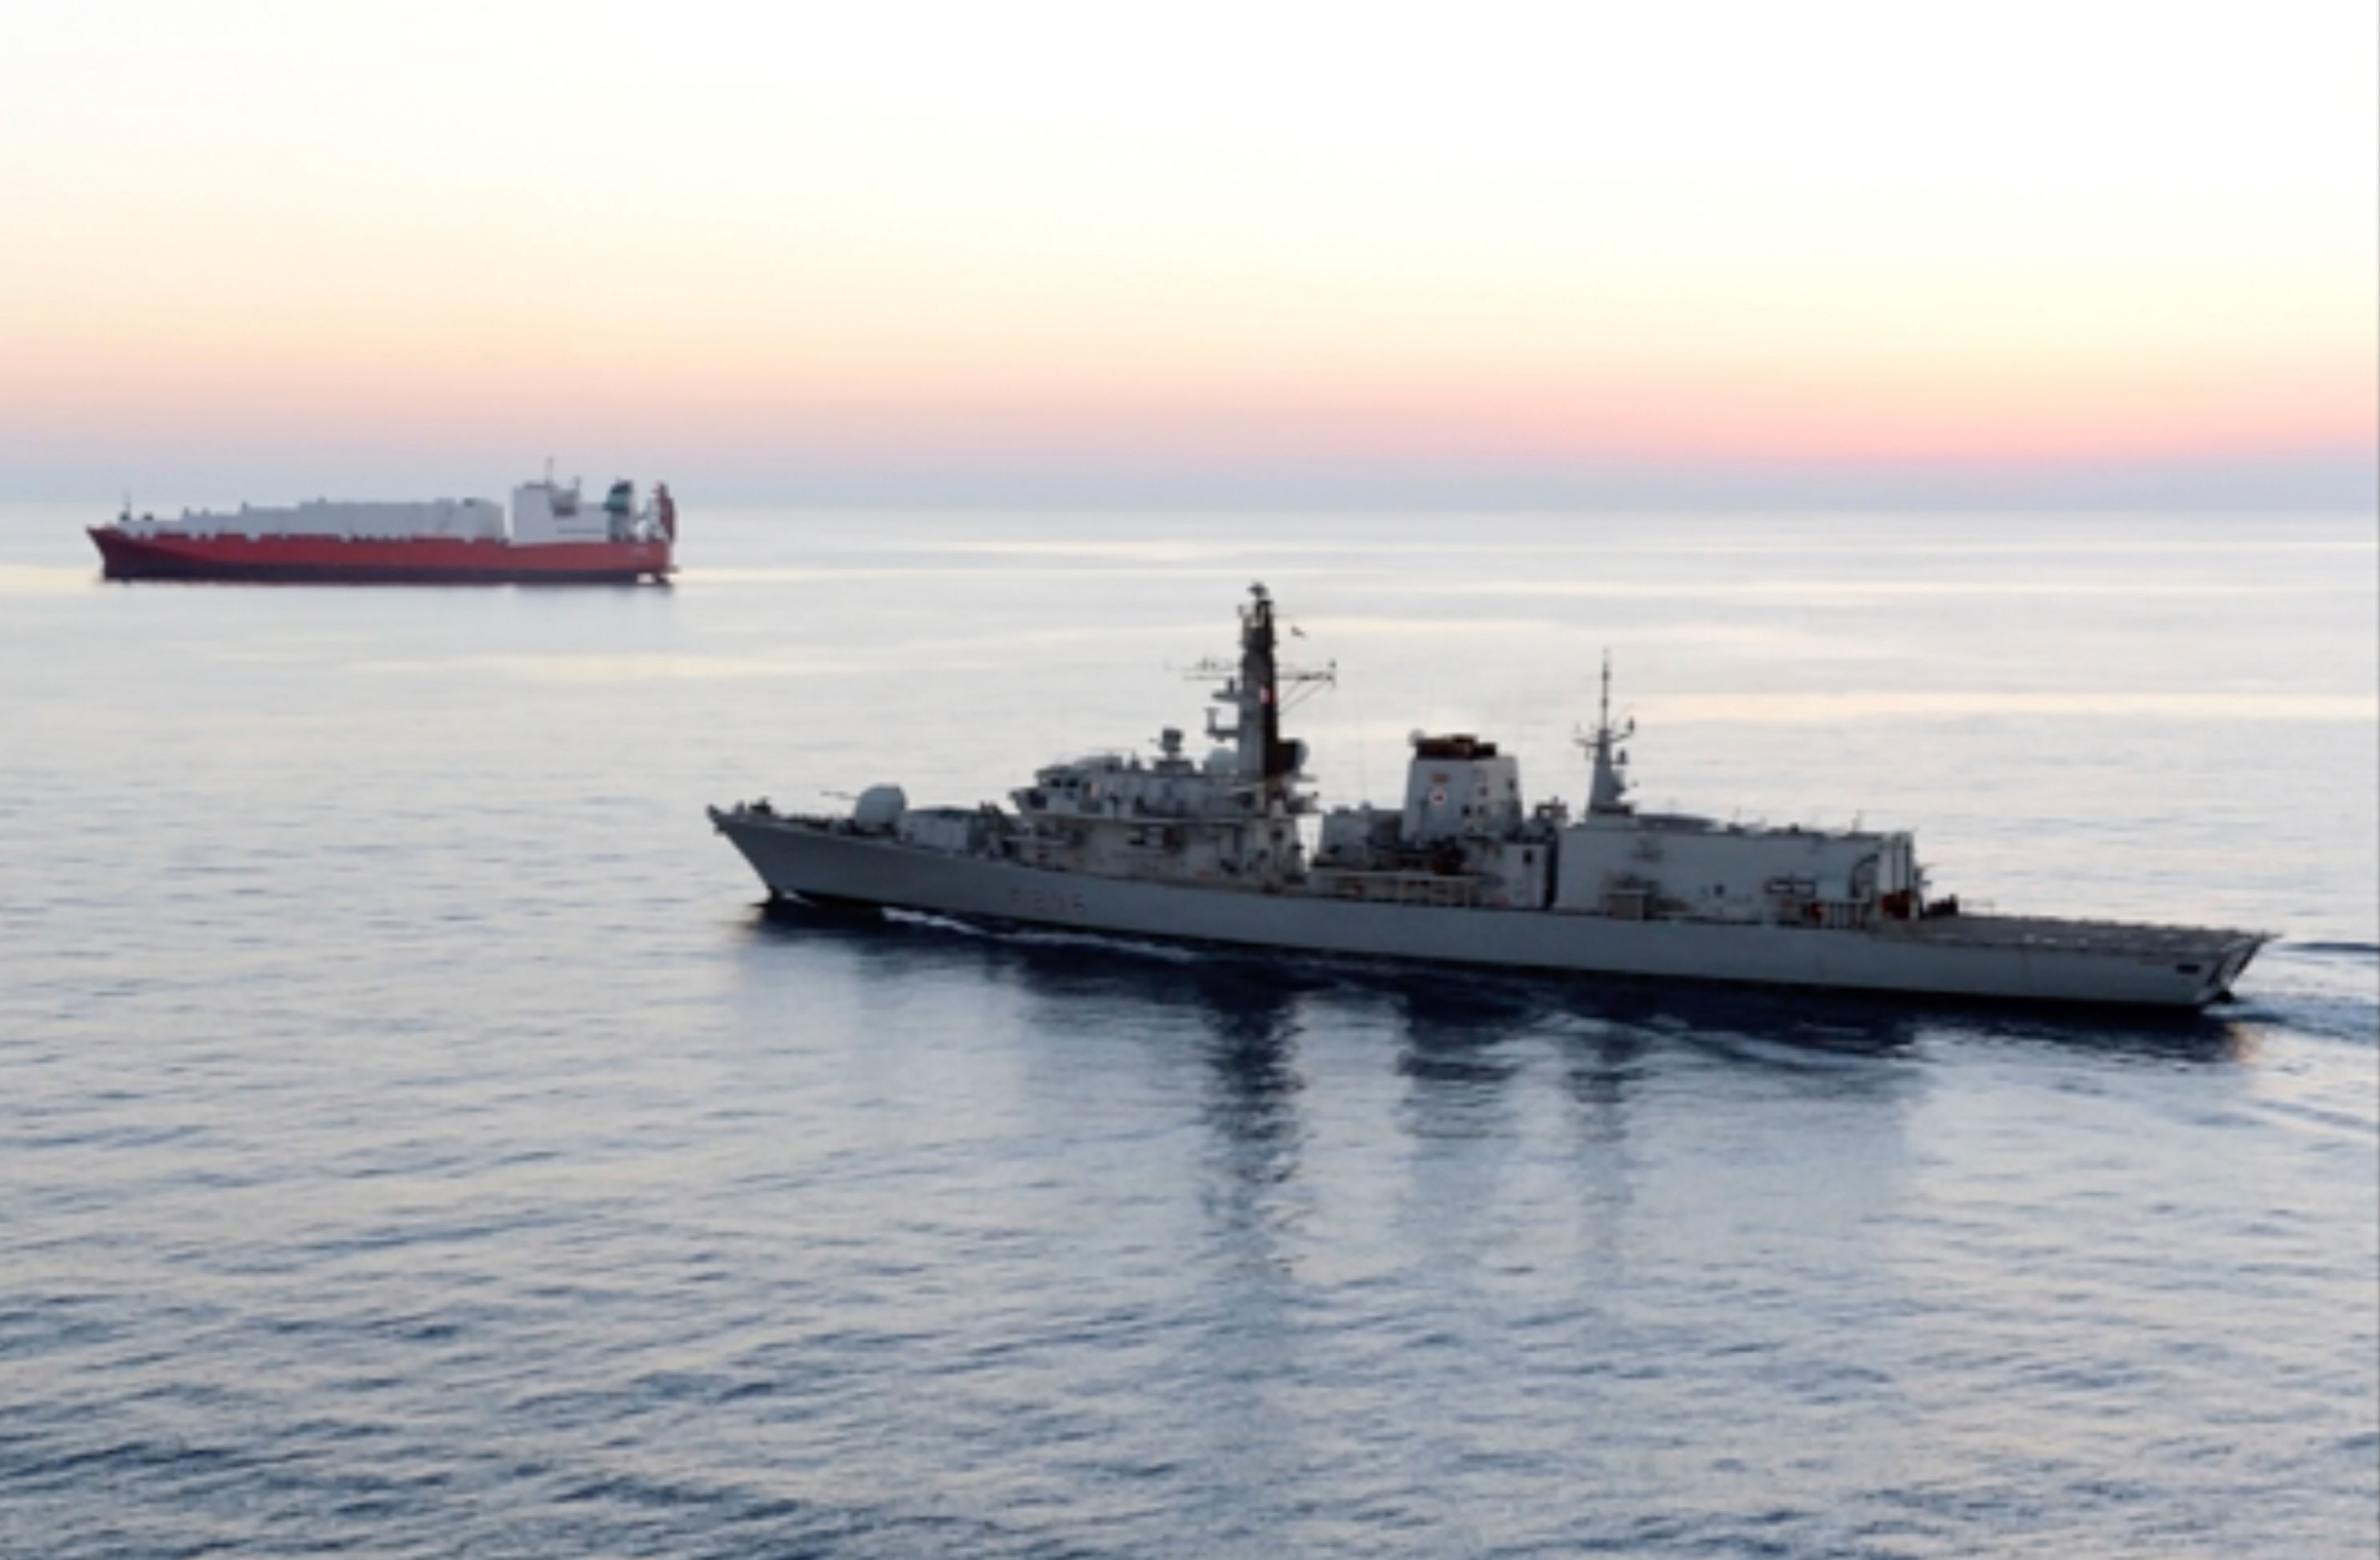 The Royal Navy’s HMS Montrose was forced to position itself between the Iranian vessels and the British Heritage oil tanker in the Strait of Hormuz on Thurday.